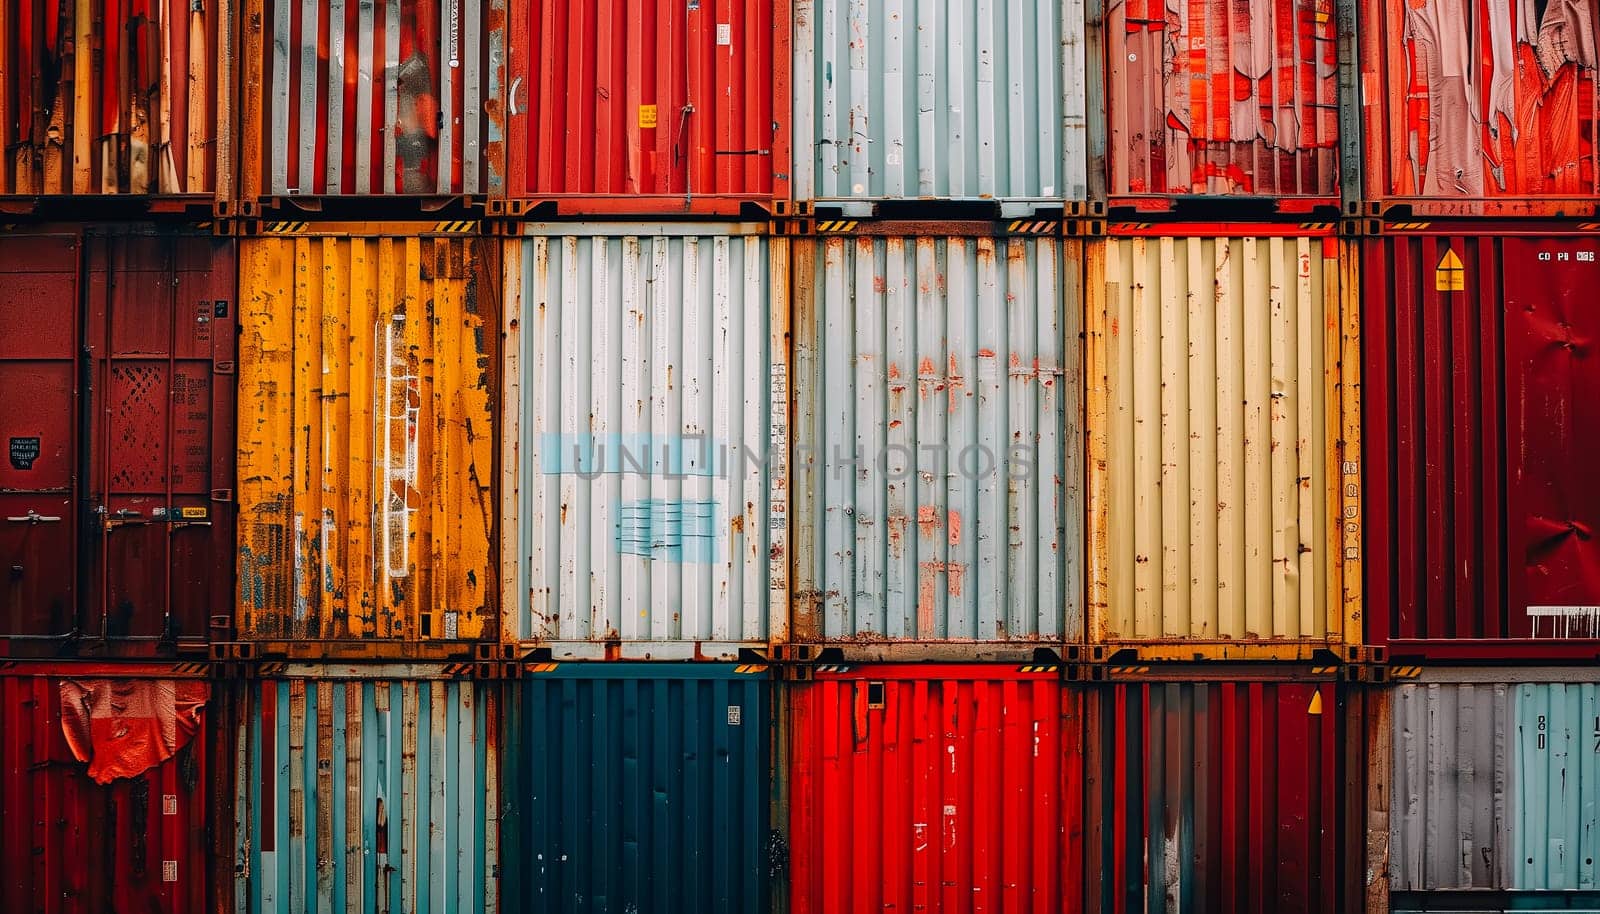 A Wall of Stacked Containers Cargo Shipping. Handling of Logistic Transportation Industry. Cargo Container ships, Freight Trucks Import-Export. Distribution Warehouse. Shipping Logistics Transport.